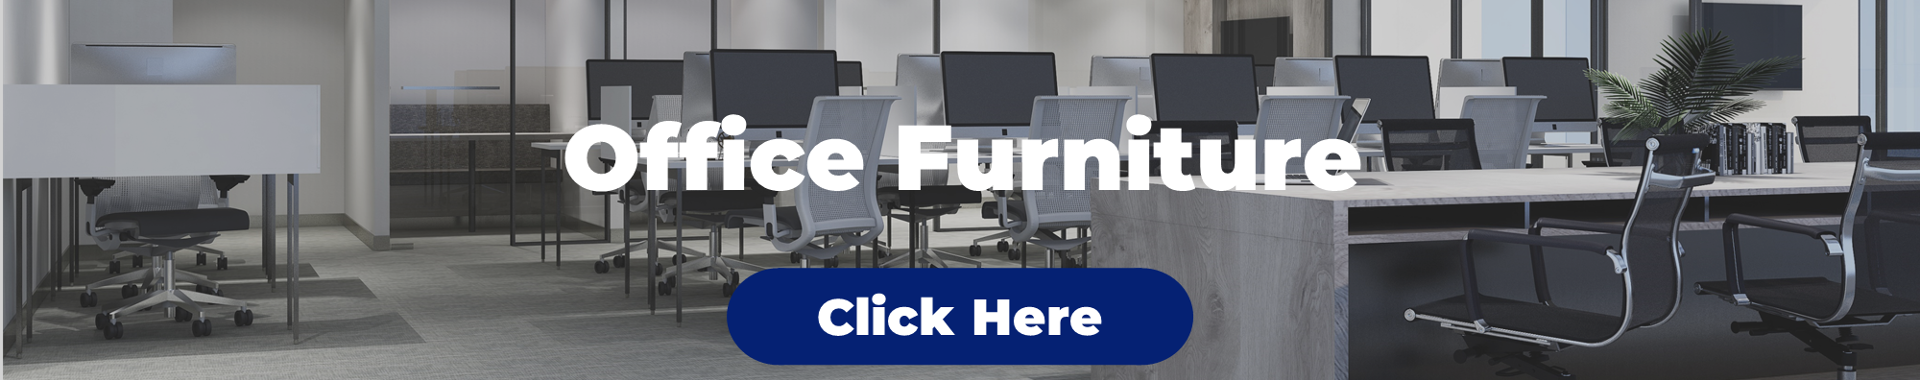 https://e7ut8we.cloudimg.io/v7/https://www.dominionofficesupplies.co.uk/ws_content/slideshow/office furniture.PNG?force_format=webp&func=crop&h=380&w=1920